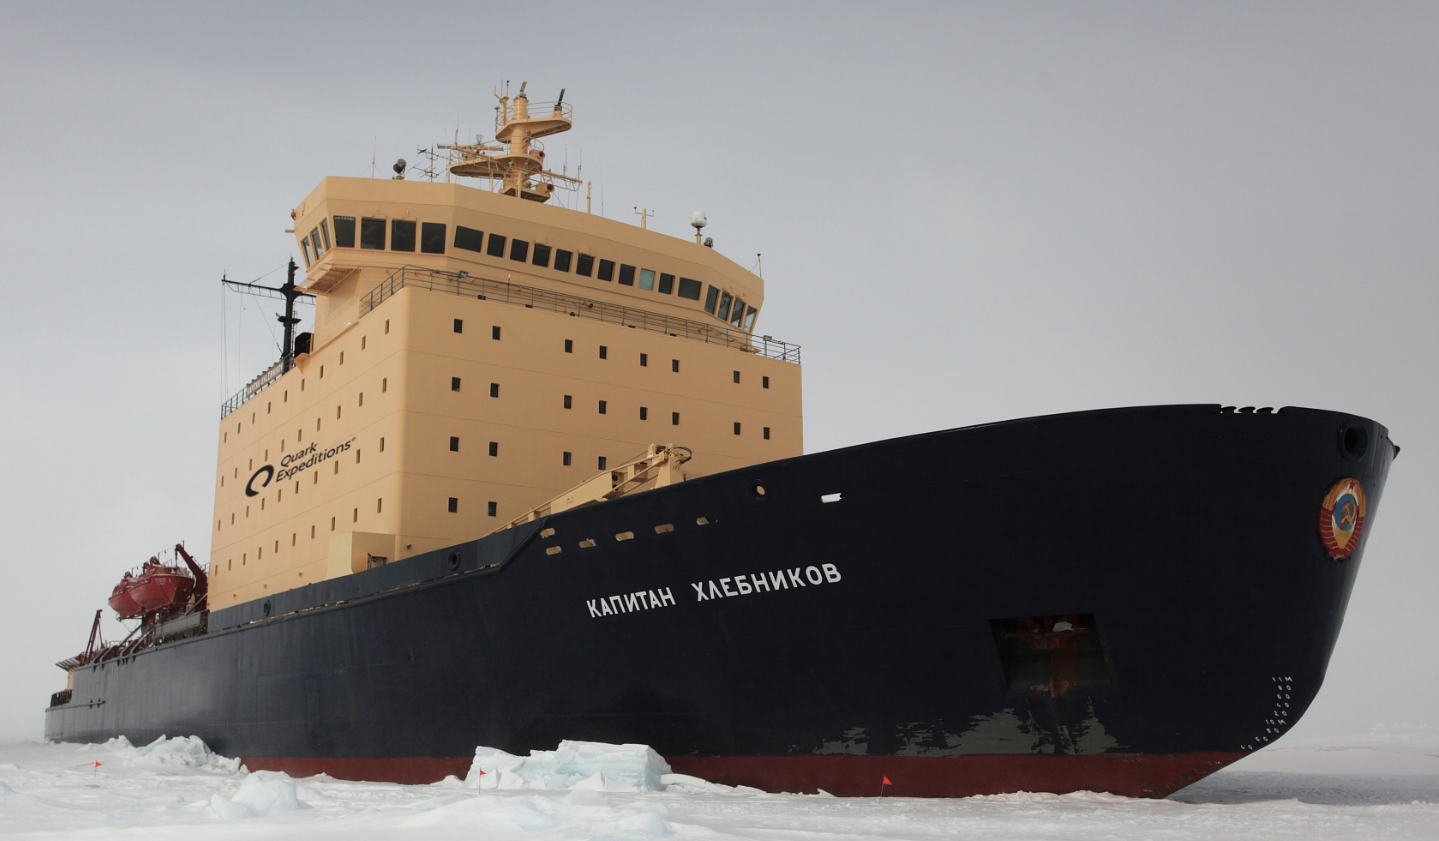 Kapitan Khlebnikov parked off the pack ice at Snow Hill Island